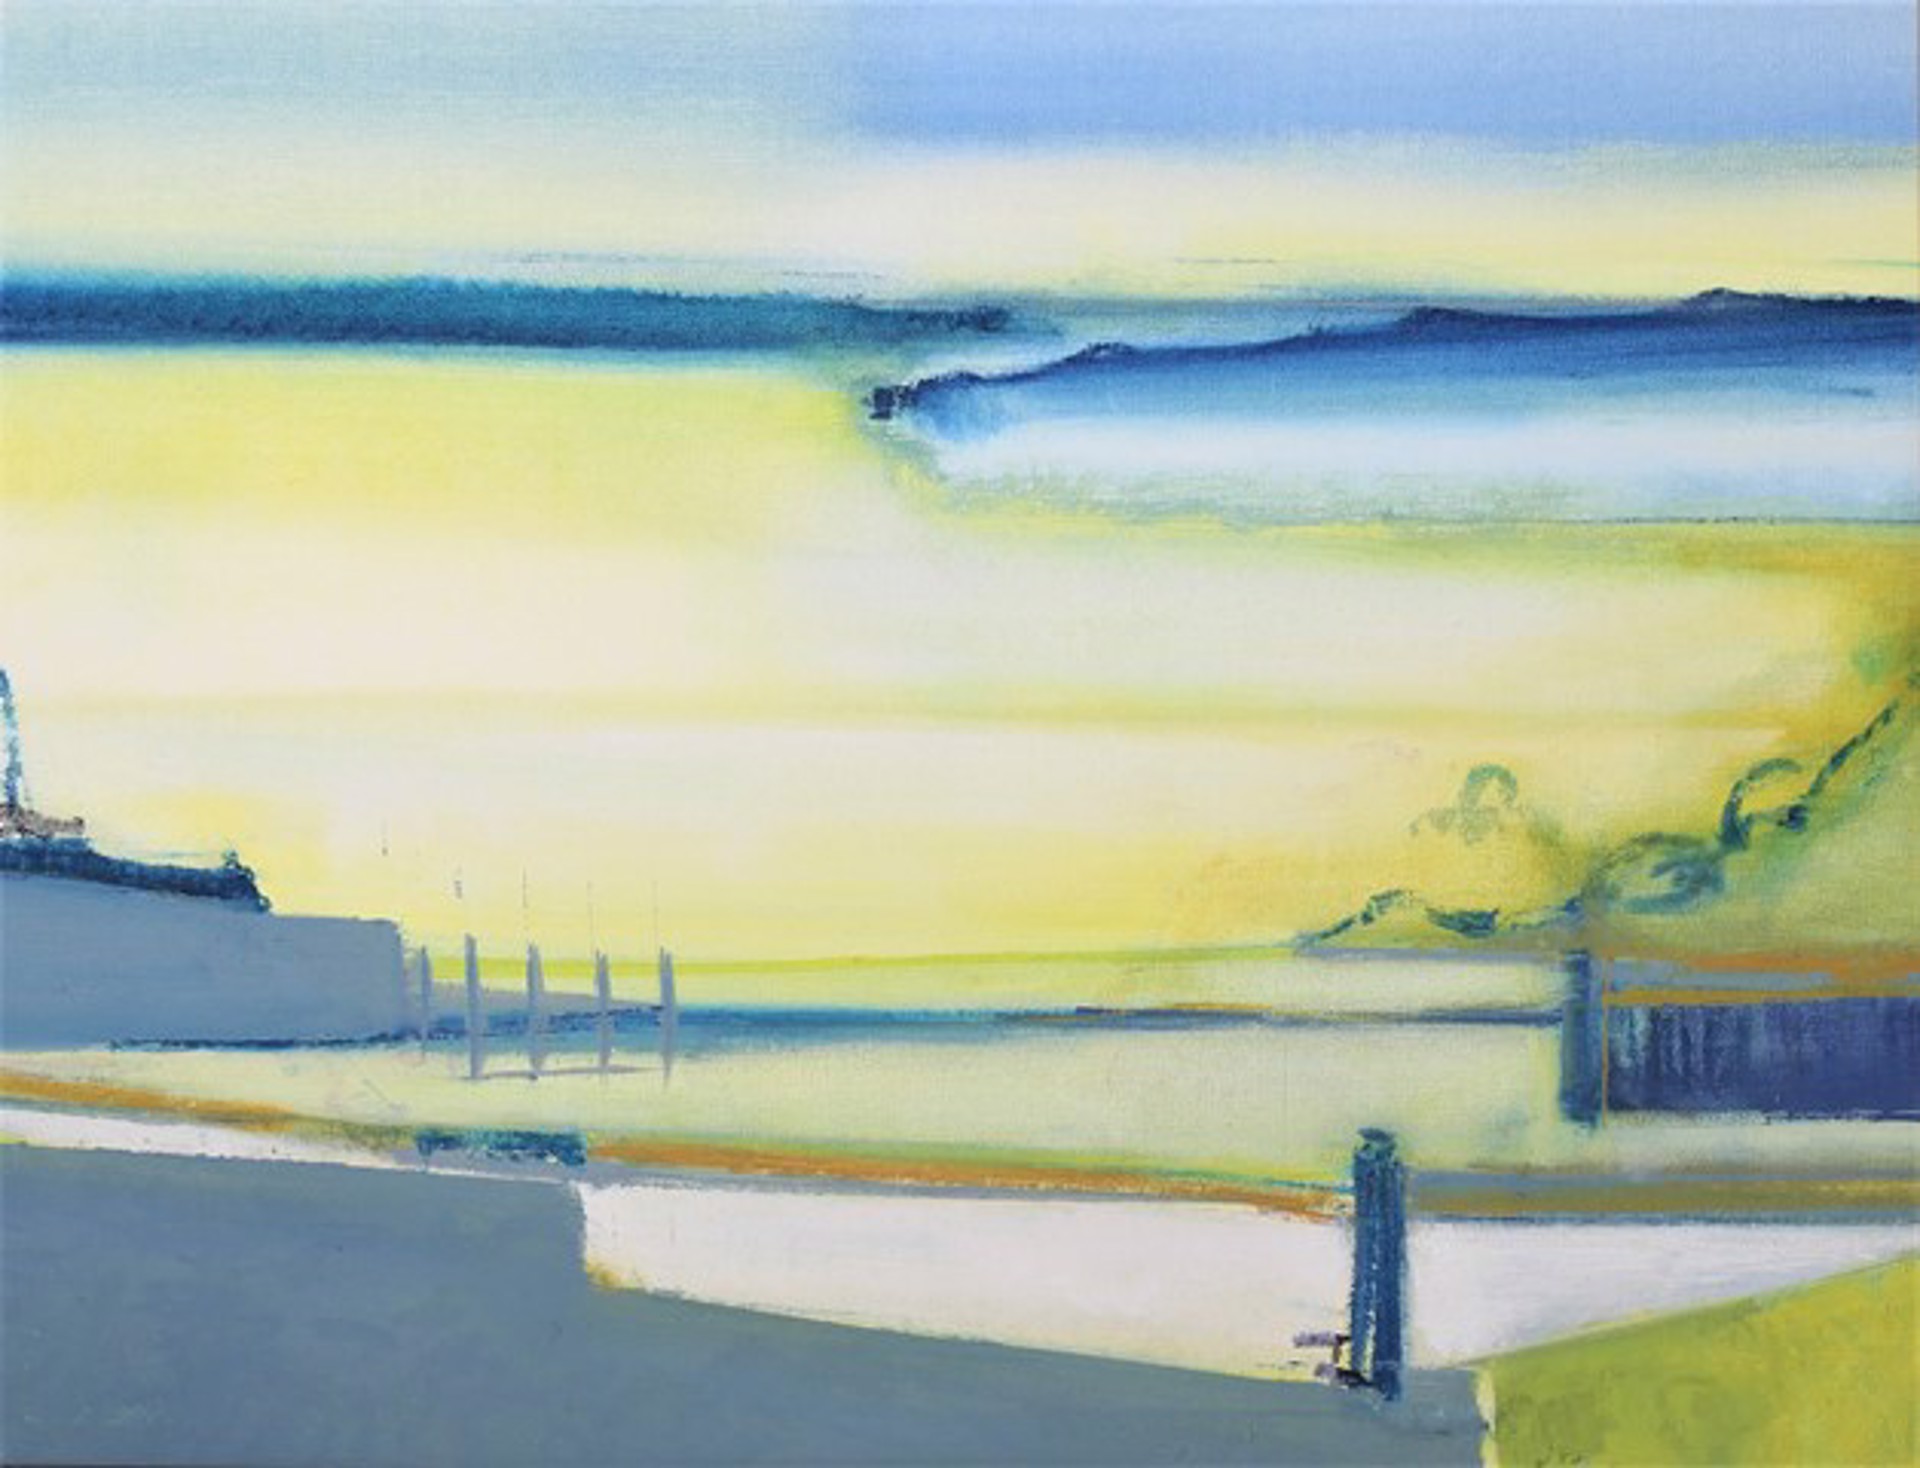 END OF THE DAY by CHRISTINA THWAITES (Landscape)